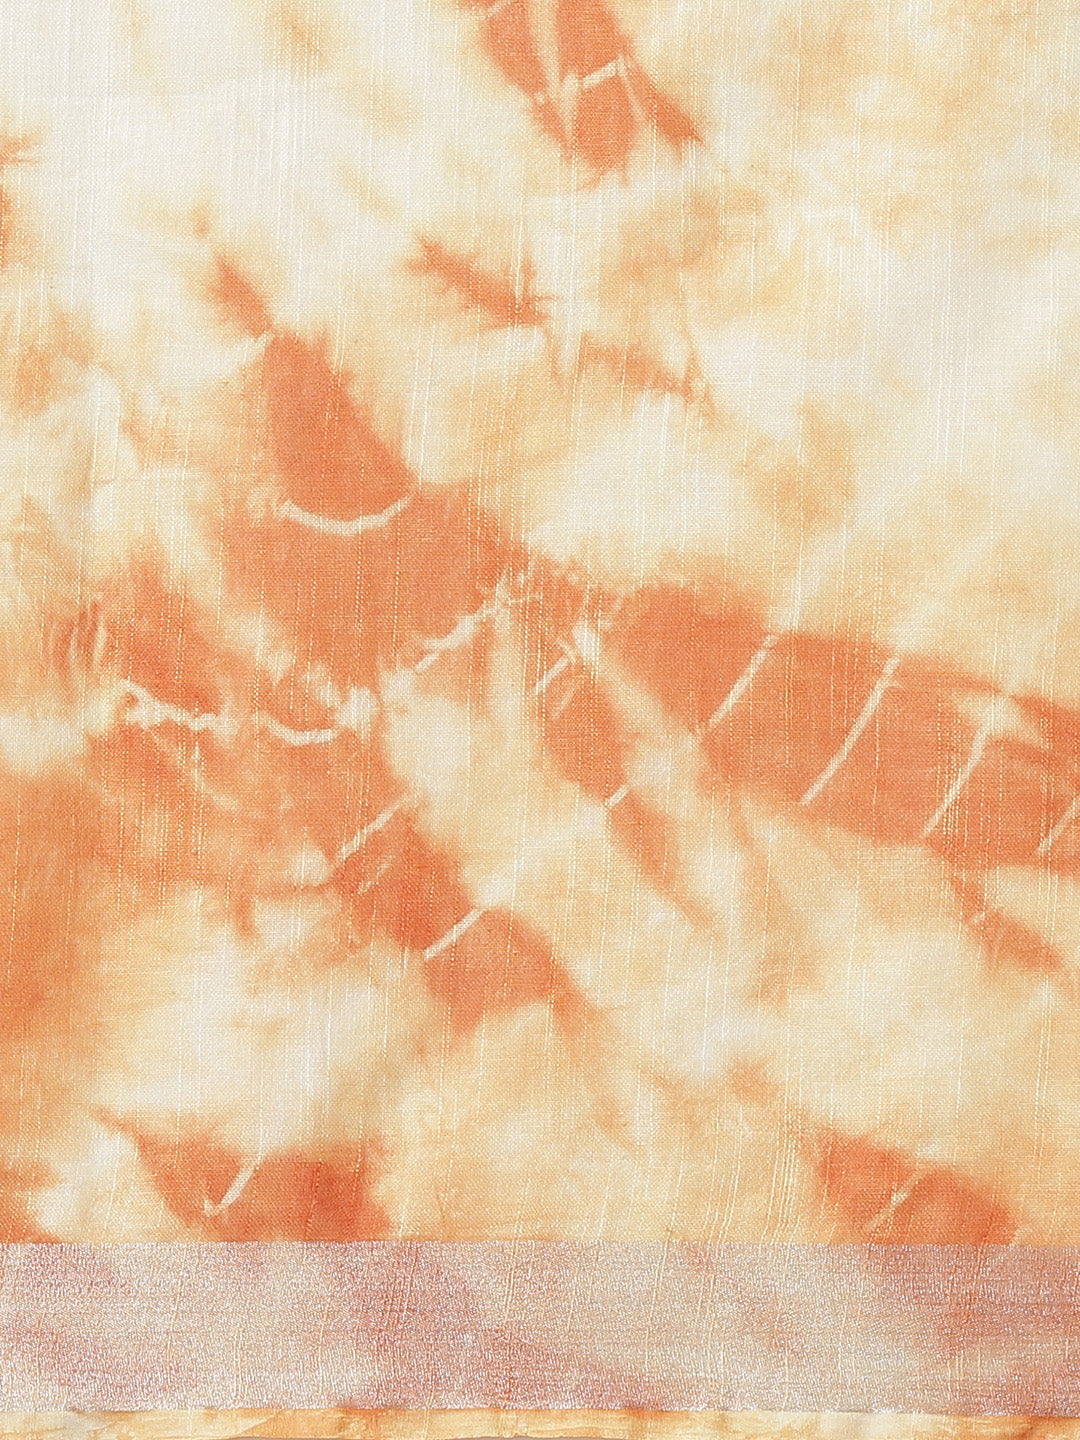 Orange and White, Kalakari India Linen Shibori Woven Saree and Blouse ALBGSA0061-Saree-Kalakari India-ALBGSA0061-Cotton, Geographical Indication, Hand Crafted, Heritage Prints, Linen, Natural Dyes, Red, Sarees, Shibori, Sustainable Fabrics, Woven, Yellow-[Linen,Ethnic,wear,Fashionista,Handloom,Handicraft,Indigo,blockprint,block,print,Cotton,Chanderi,Blue, latest,classy,party,bollywood,trendy,summer,style,traditional,formal,elegant,unique,style,hand,block,print, dabu,booti,gift,present,glamorous,